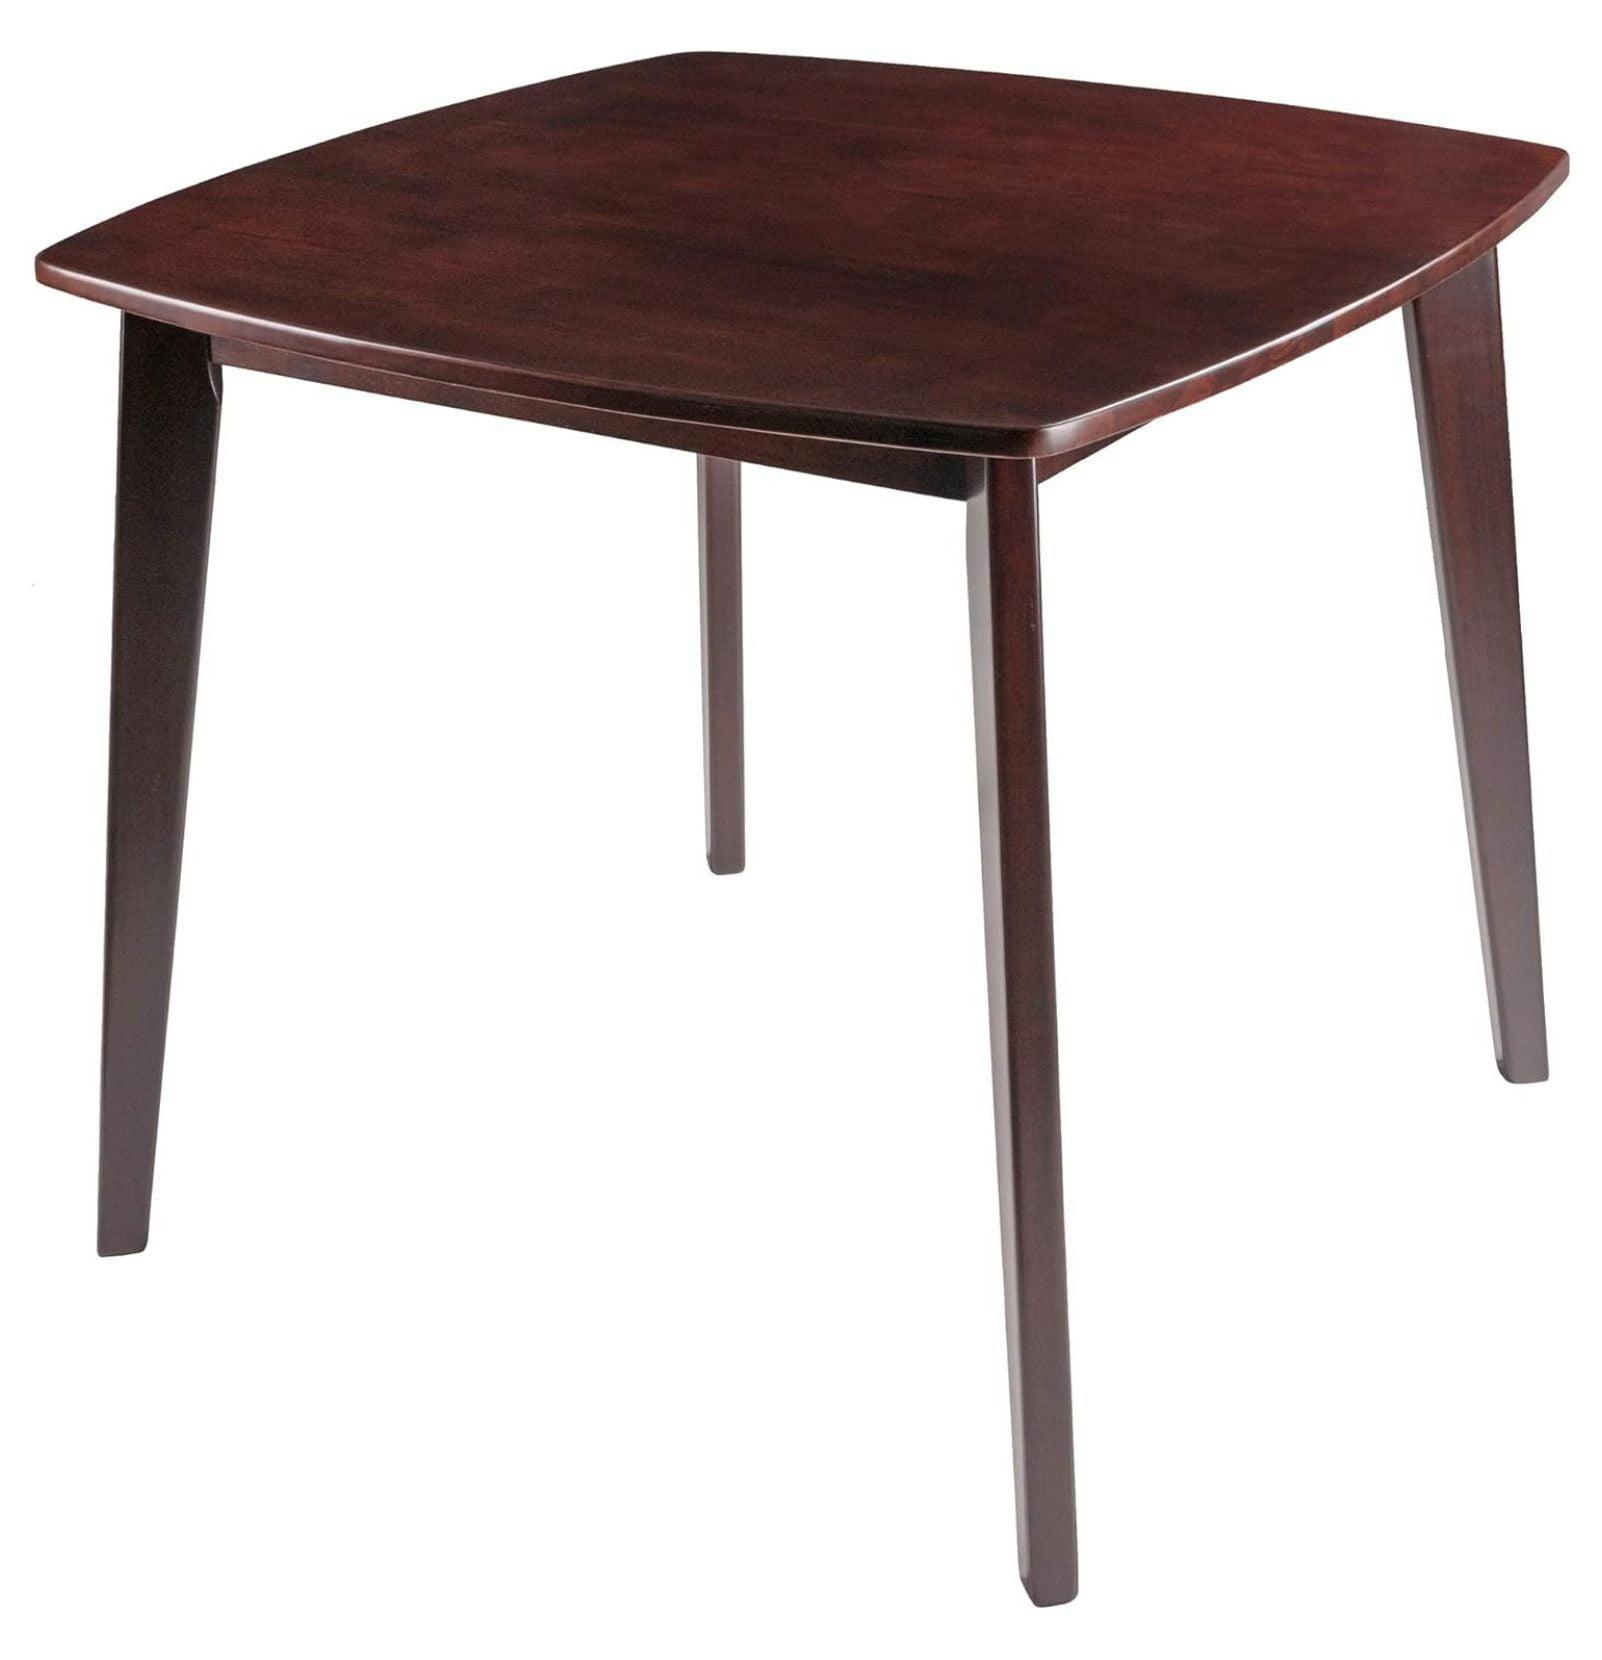 Transitional Square Walnut Dining Table with Tapered Legs